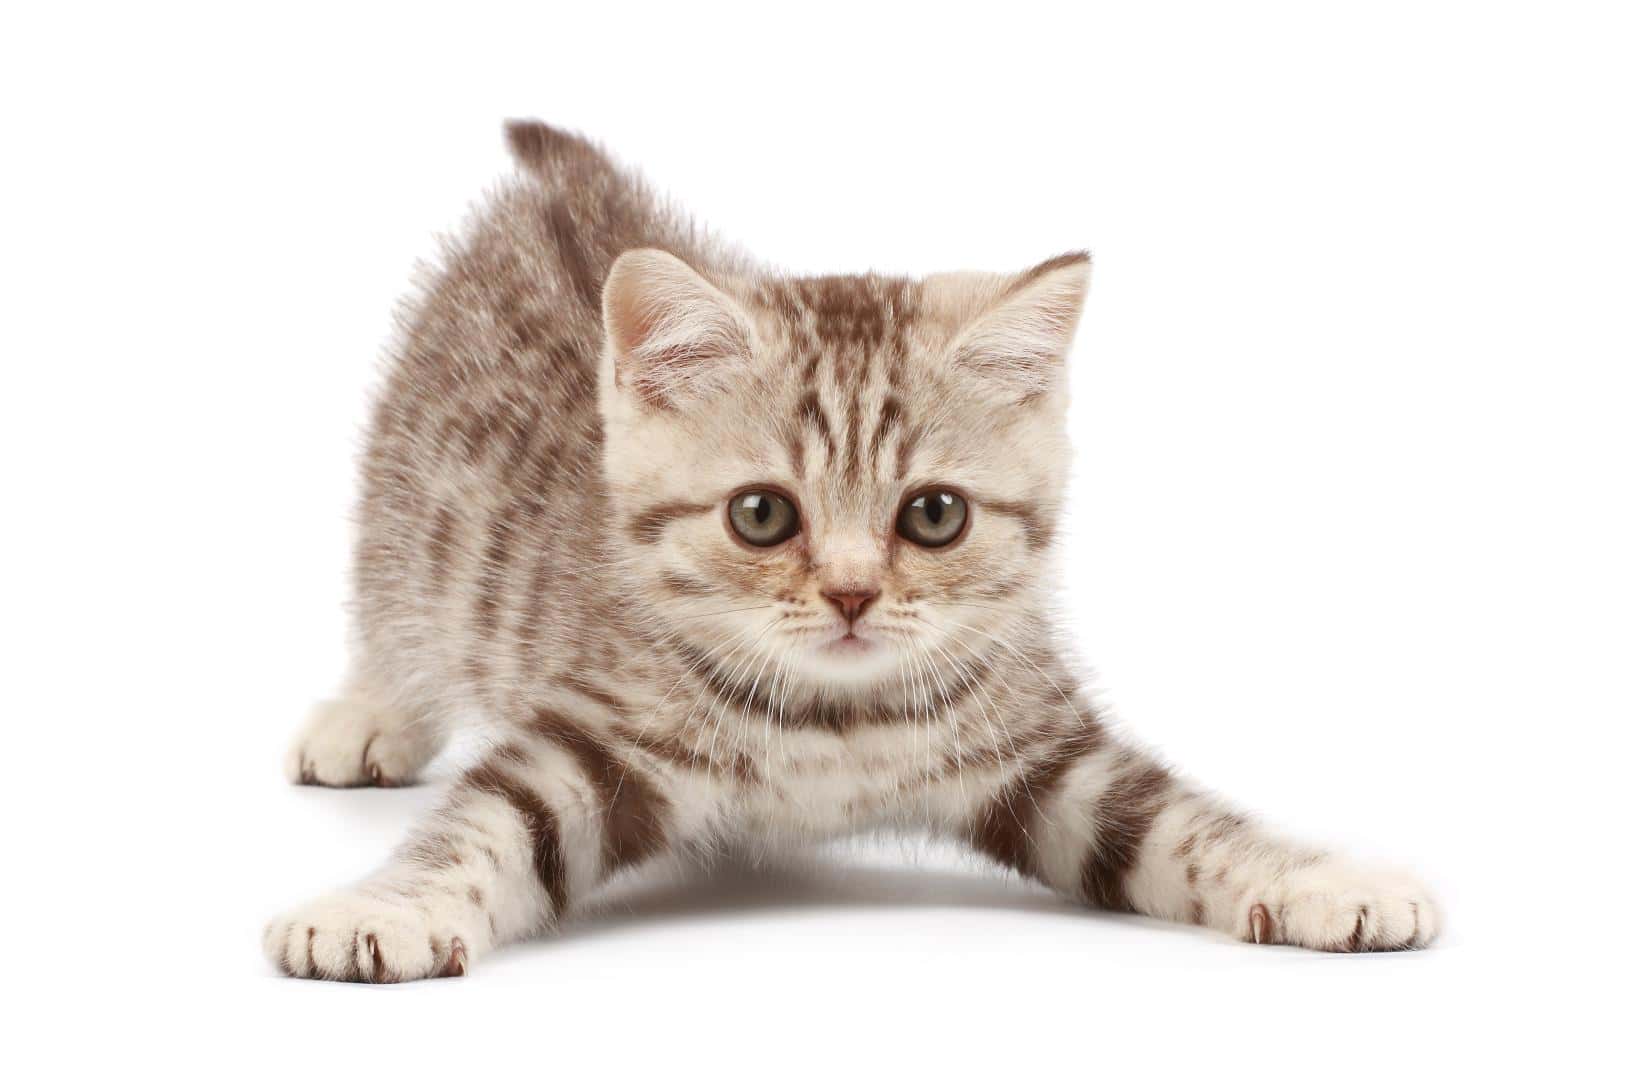 New to Cat Parenting? Here’s Your Guide to a Purr-fect Start